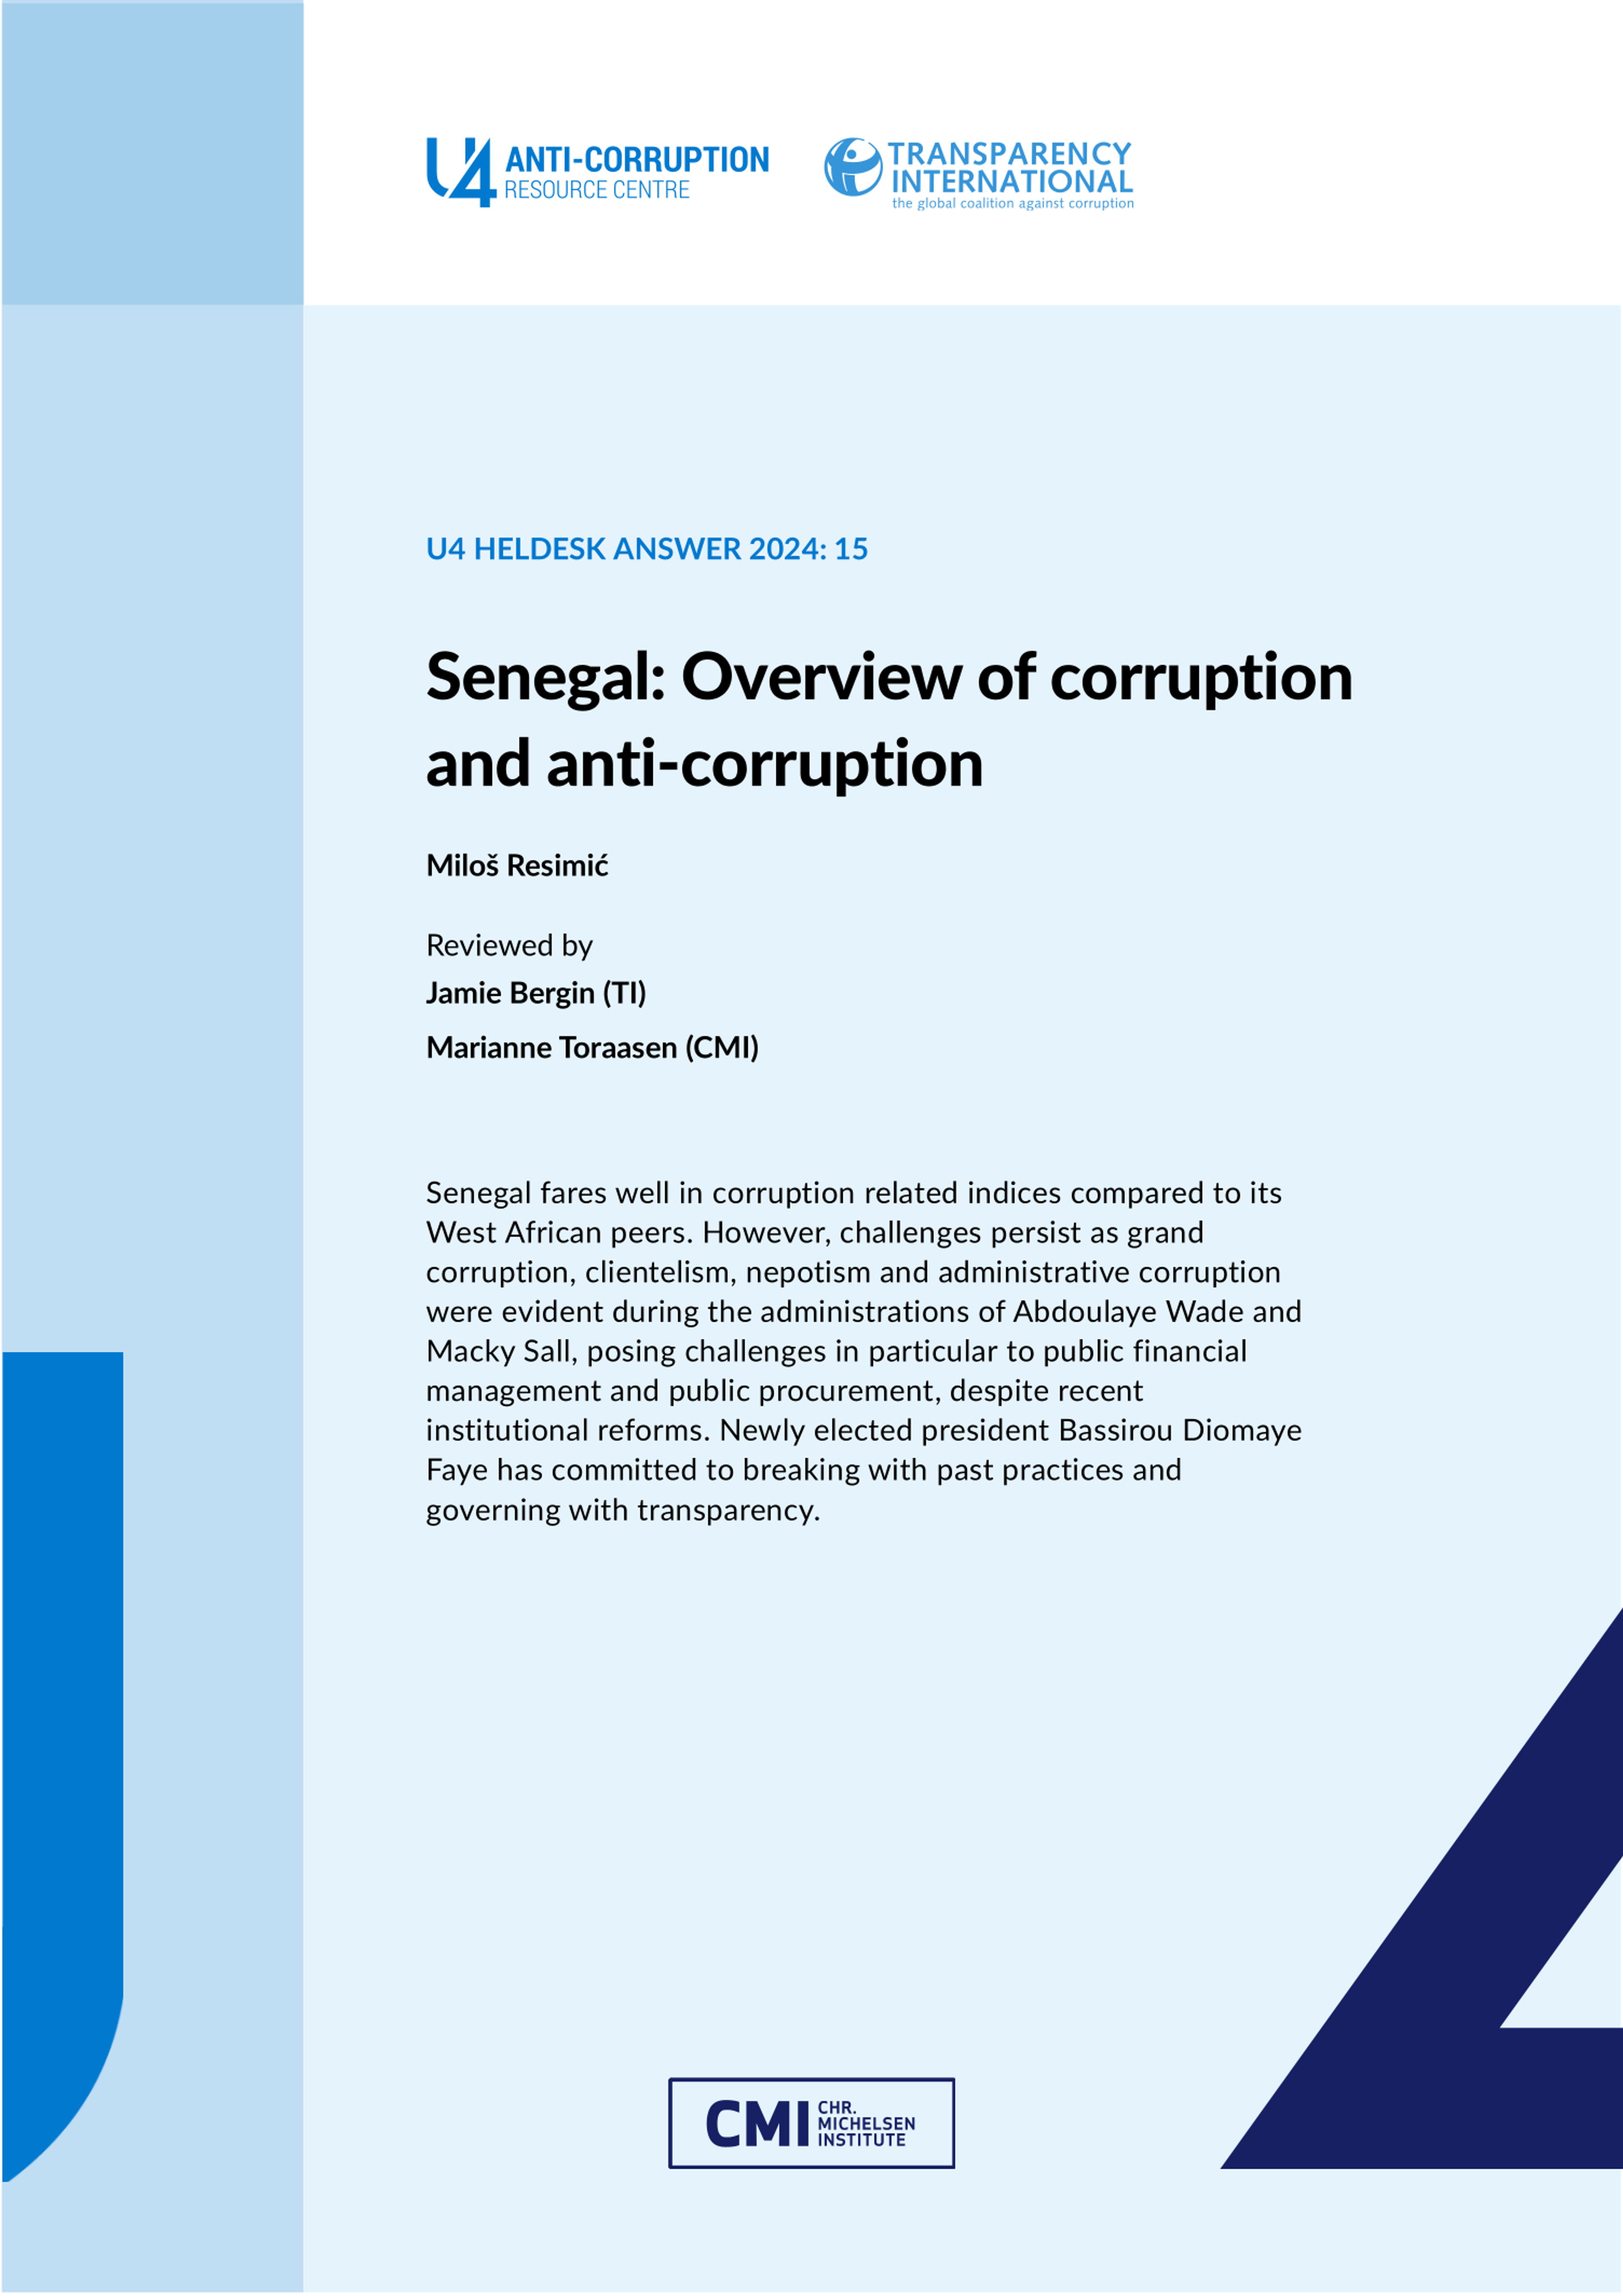 Senegal: Overview of corruption and anti-corruption